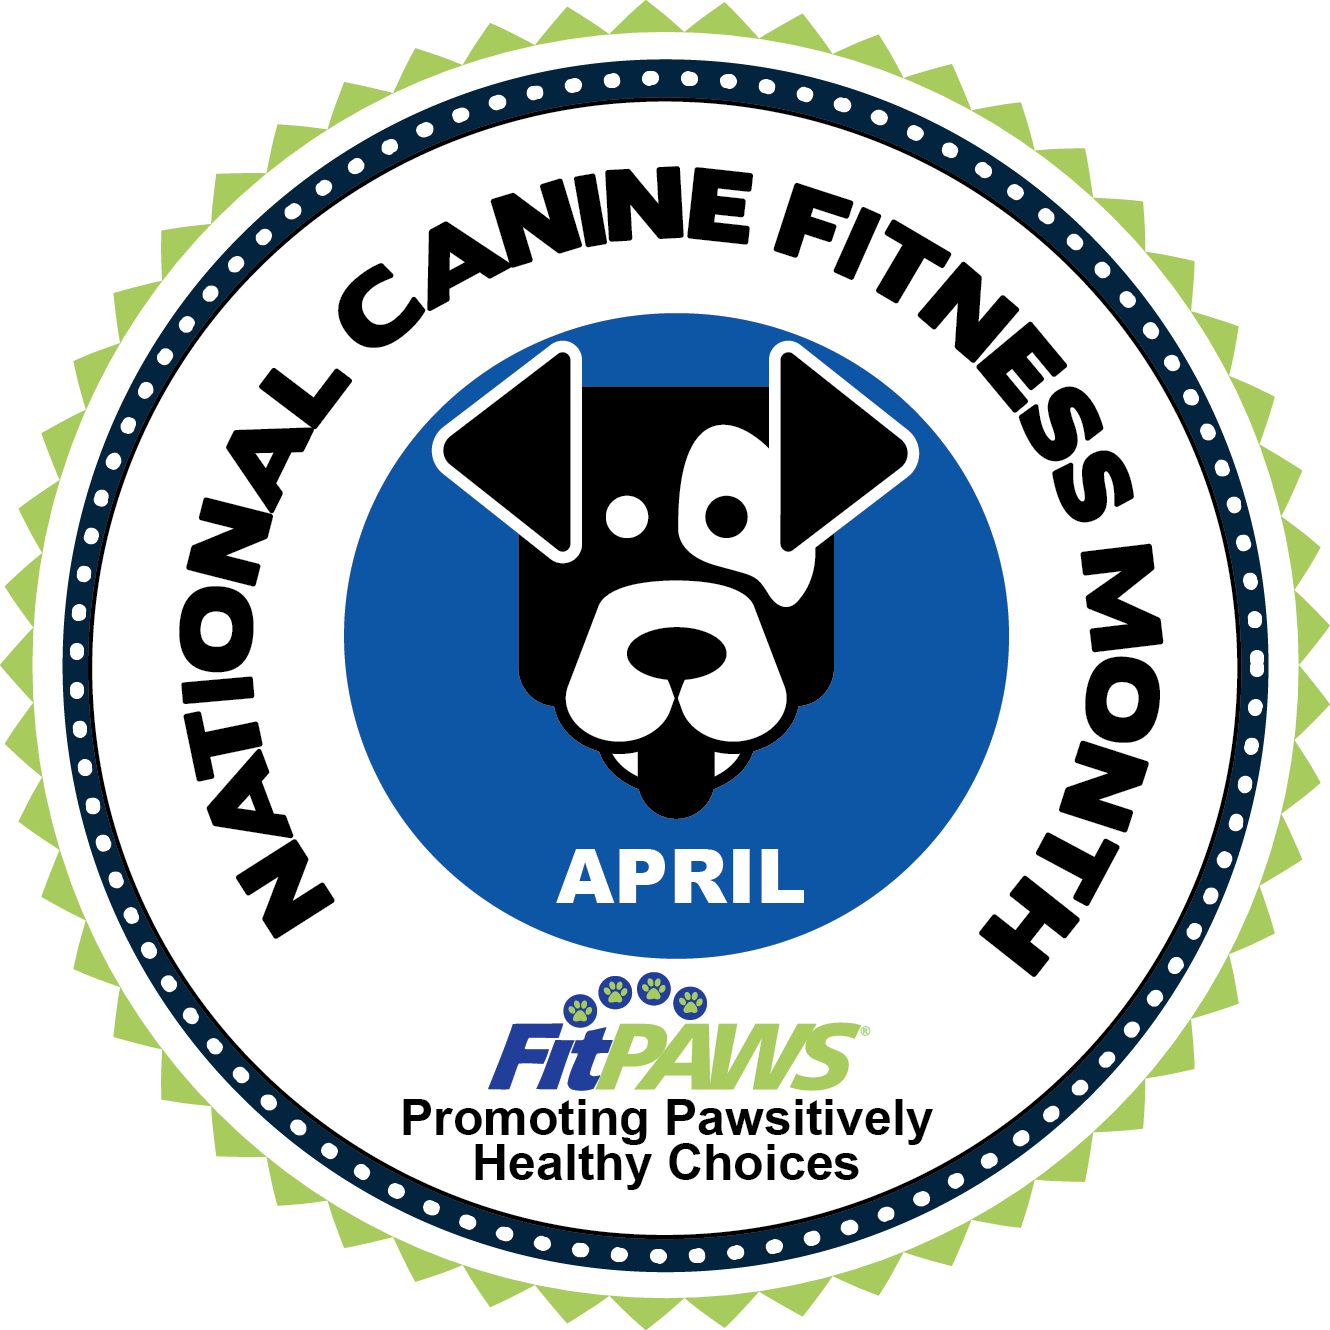 April Kicks Off National Canine Fitness Month, But - ドラえもん 魔界 大 冒険 (1330x1330)